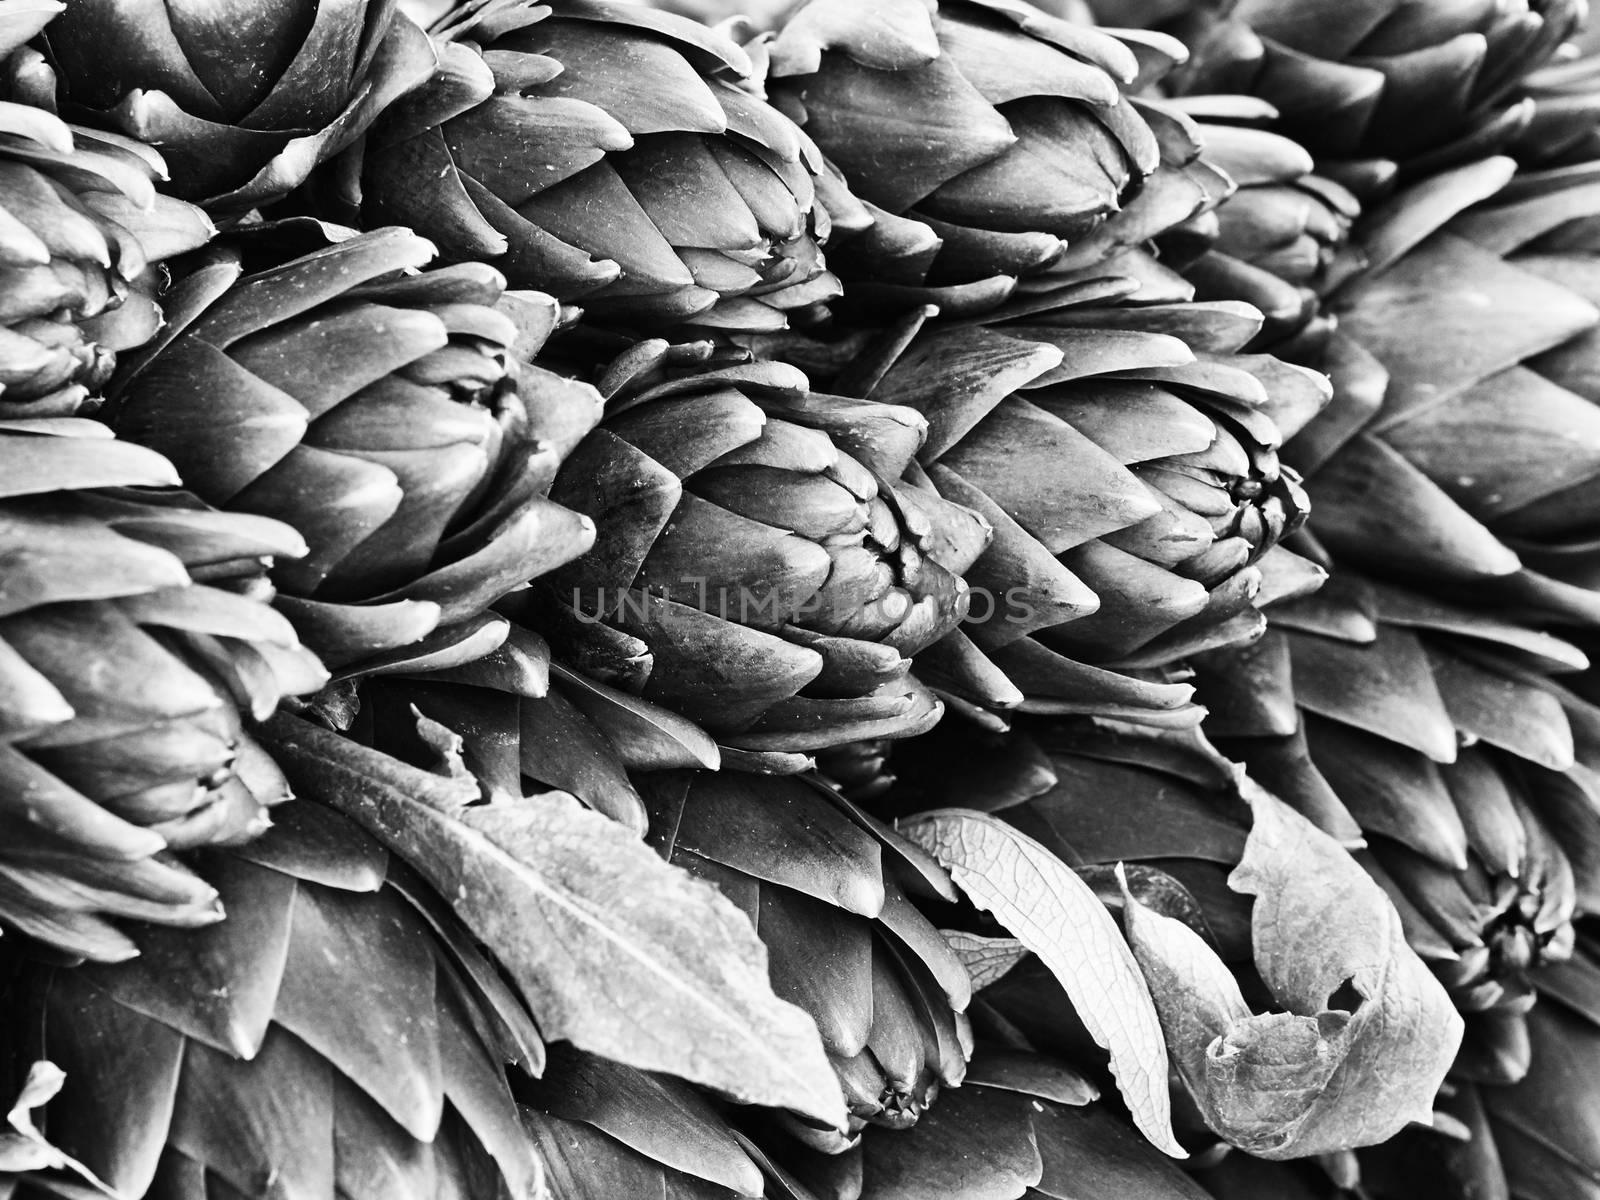 Black and White image of artichokes at street market